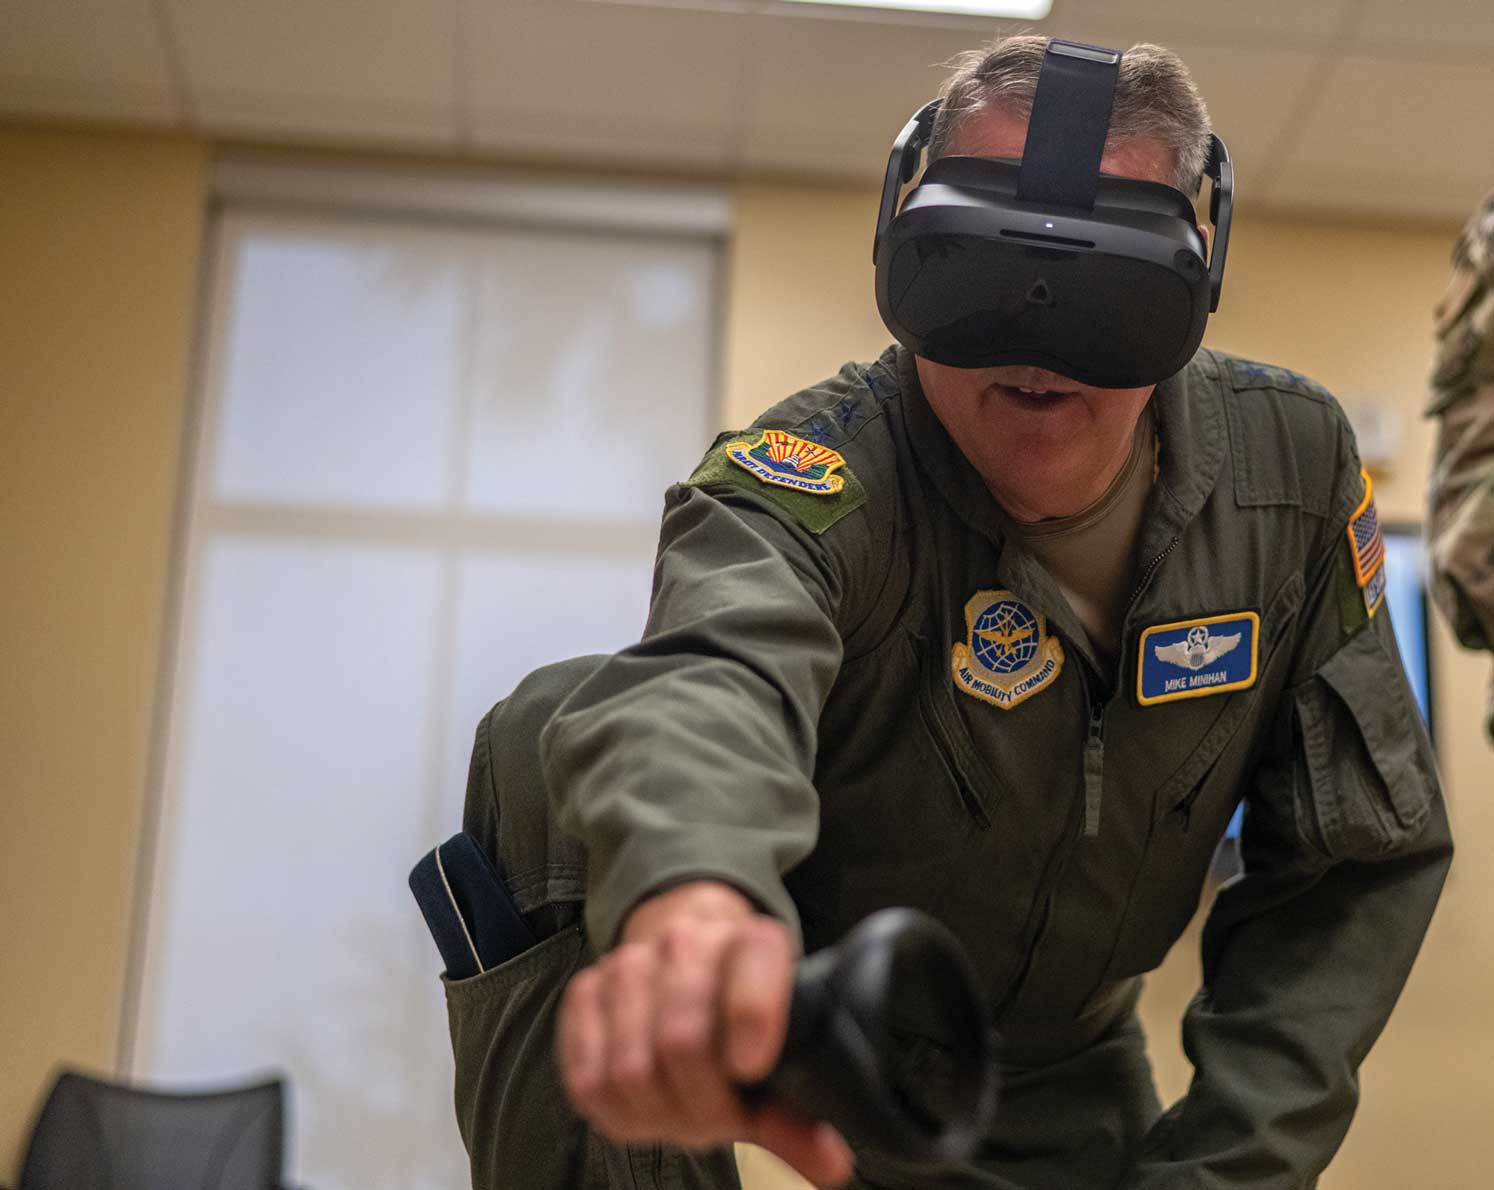 A man in an air force uniform wearing goggles and holding a controller.